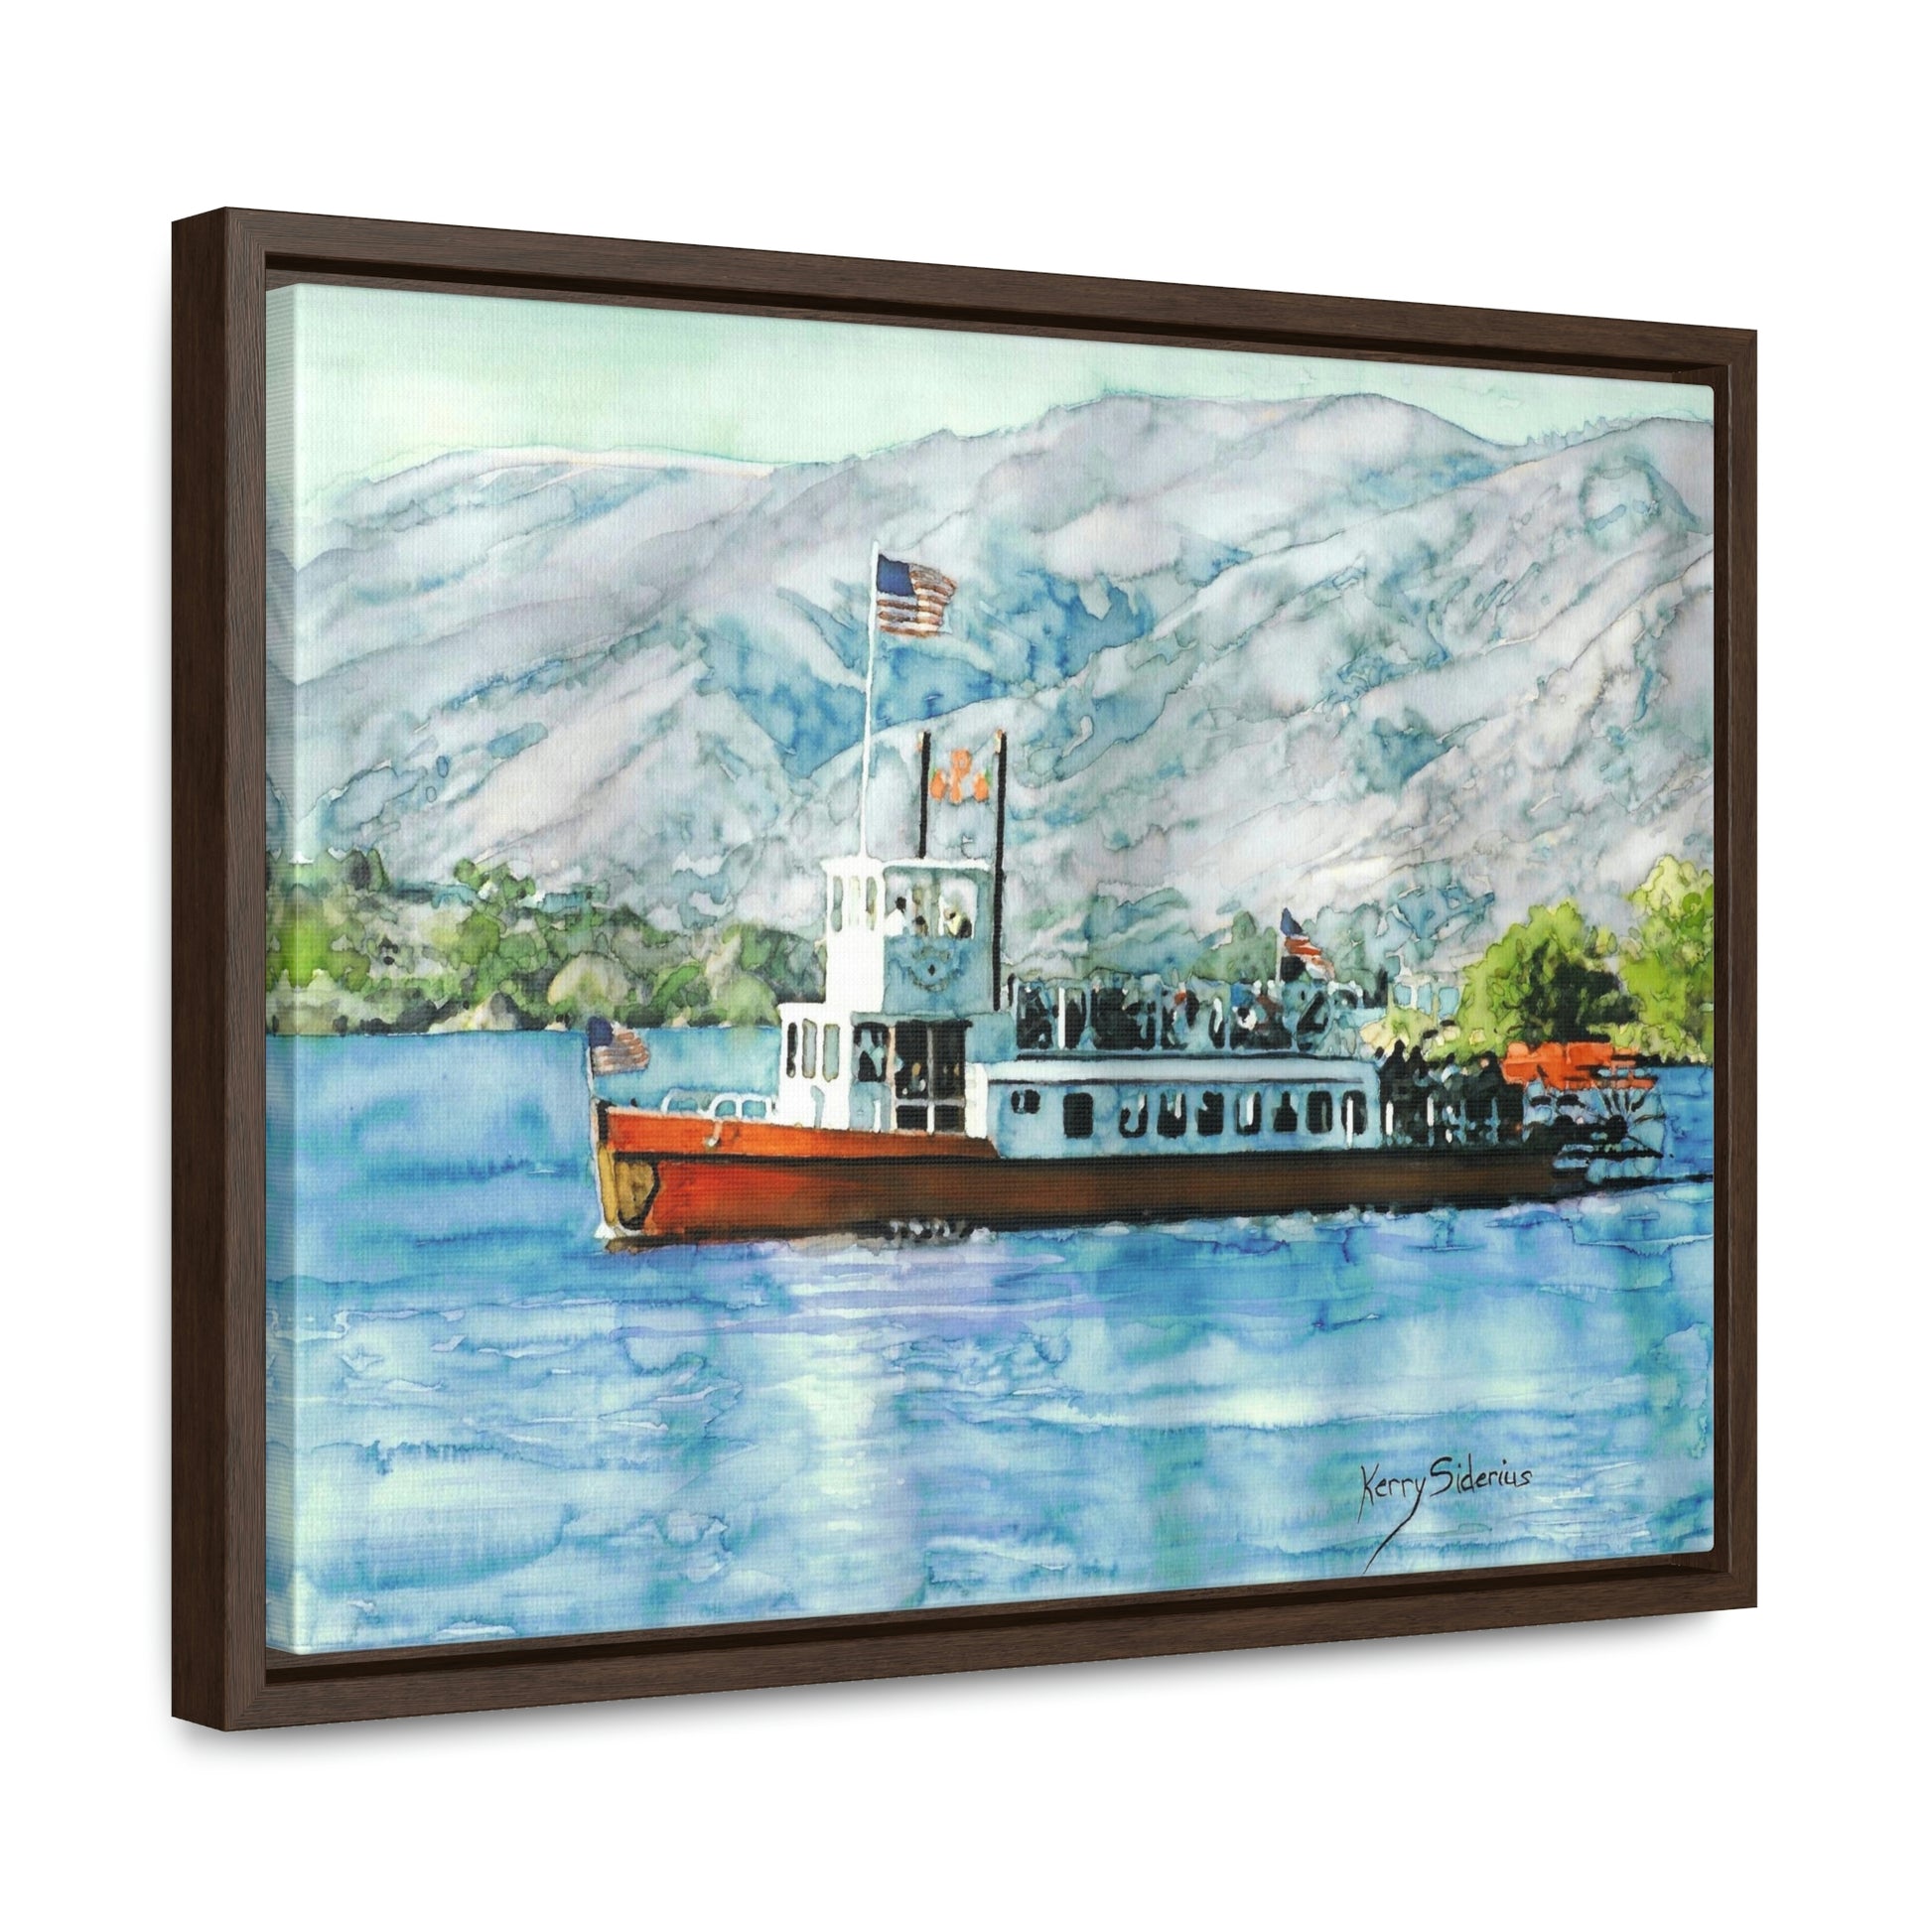 "Entiat Princess" Gallery Wrapped Wood-Framed Canvas - Kerry Siderius Art 